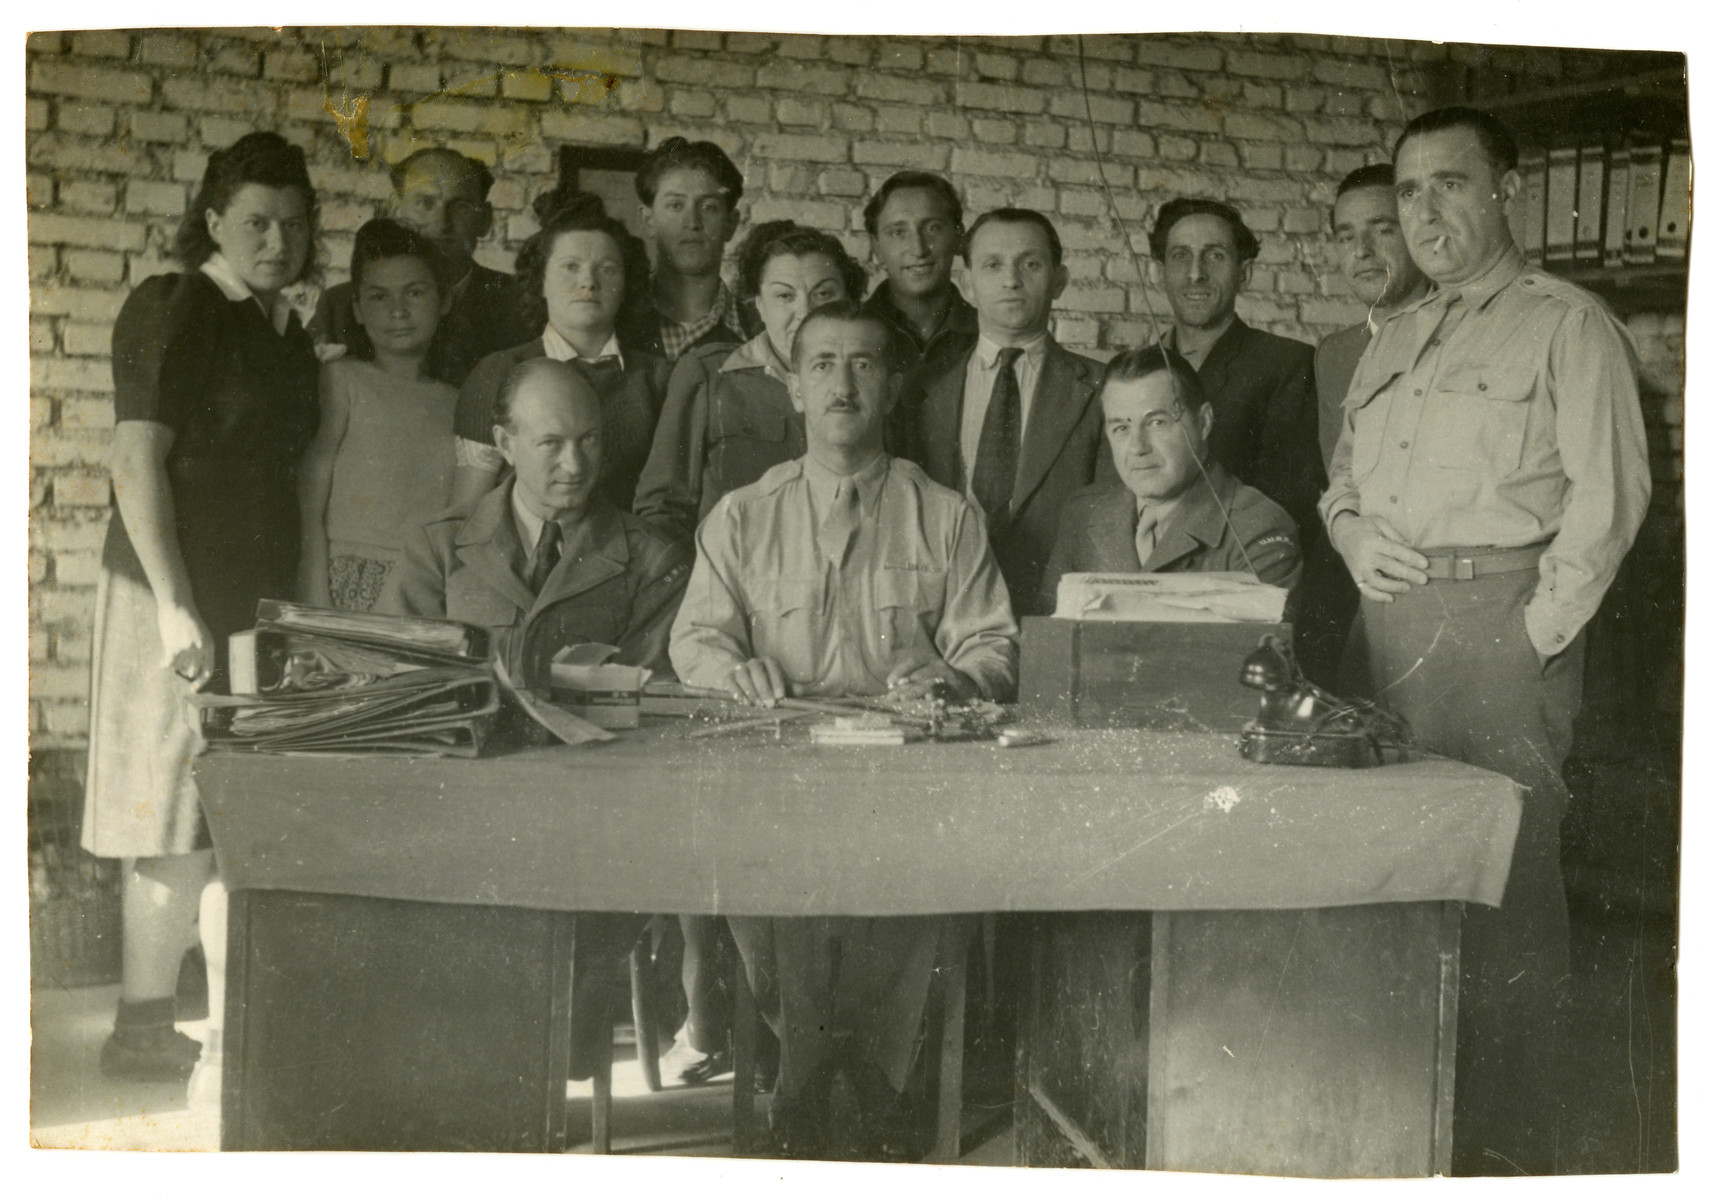 Administrative office of the Feldafing displaced persons camp.

Leib Szapiro is pictured third from the right.